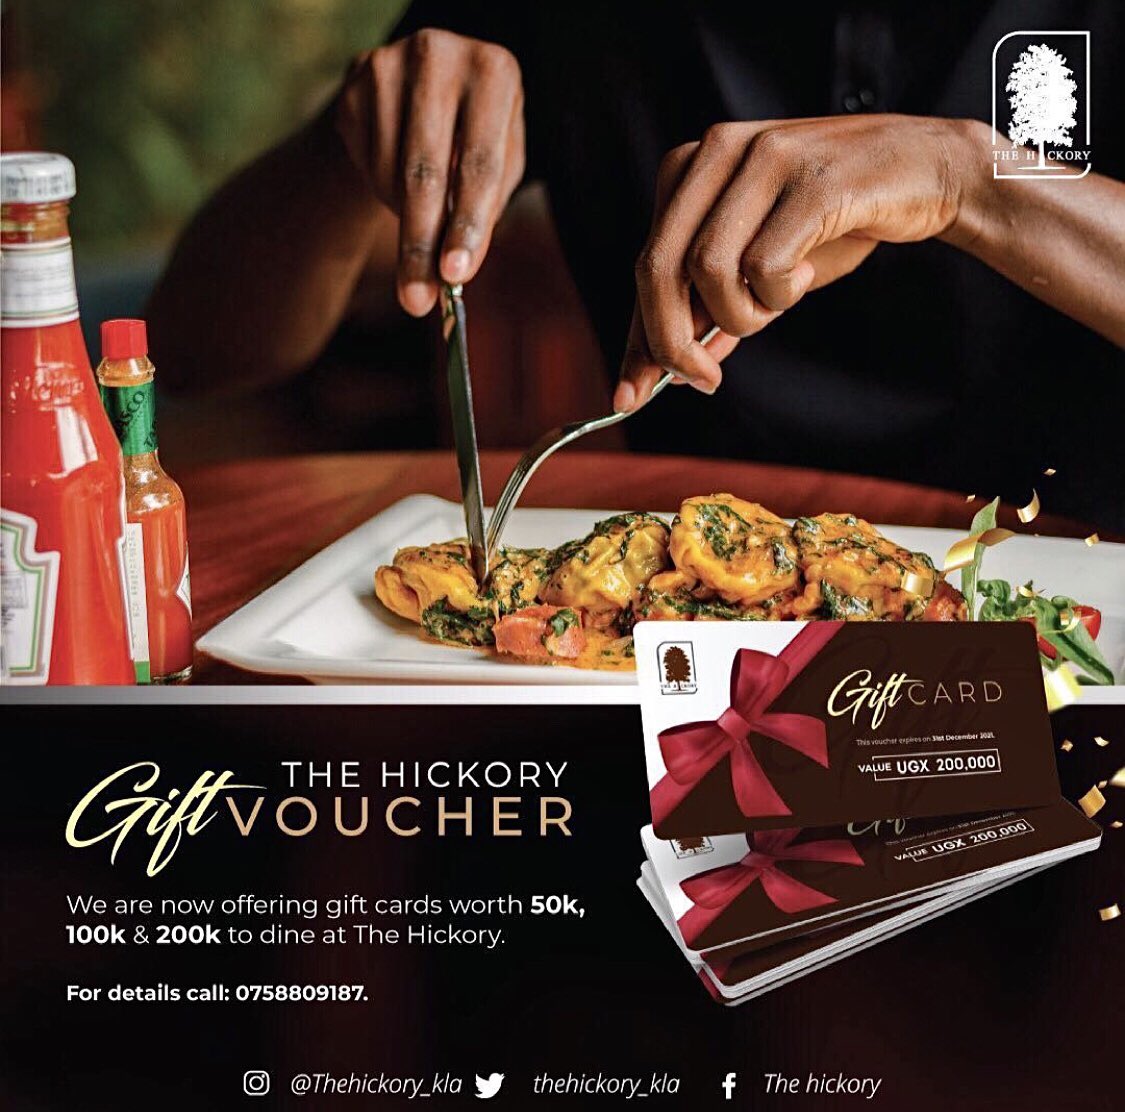 From a heartfelt thank you, to a joyous congratulations or well done, The Hickory Gift Voucher is a great way to reward a friend, family member or colleague. 

DM/Call to order your voucher 
☎️: 0758809187  
#TheHickory #GiftVouchers